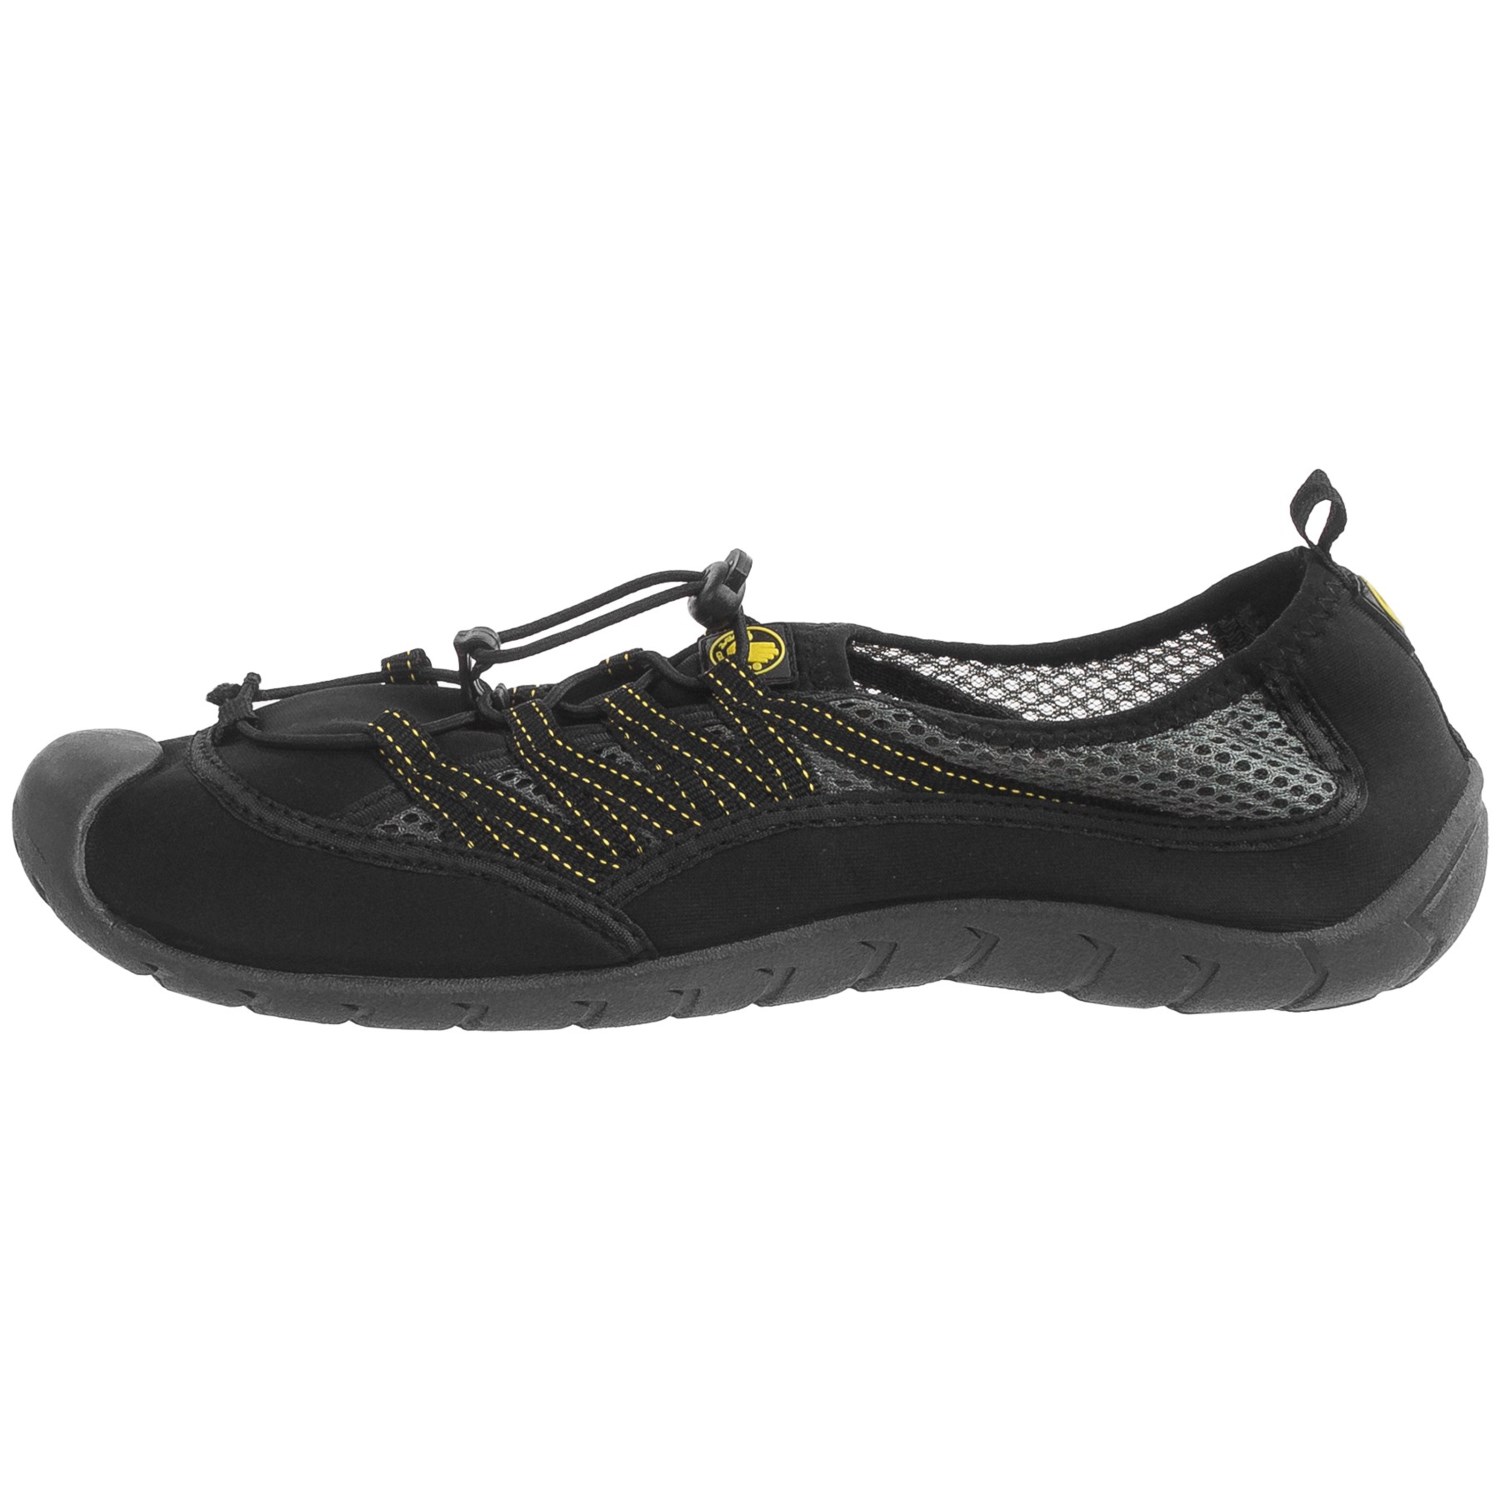 88 Limited Edition Body glove sidewinder water shoes review for Women